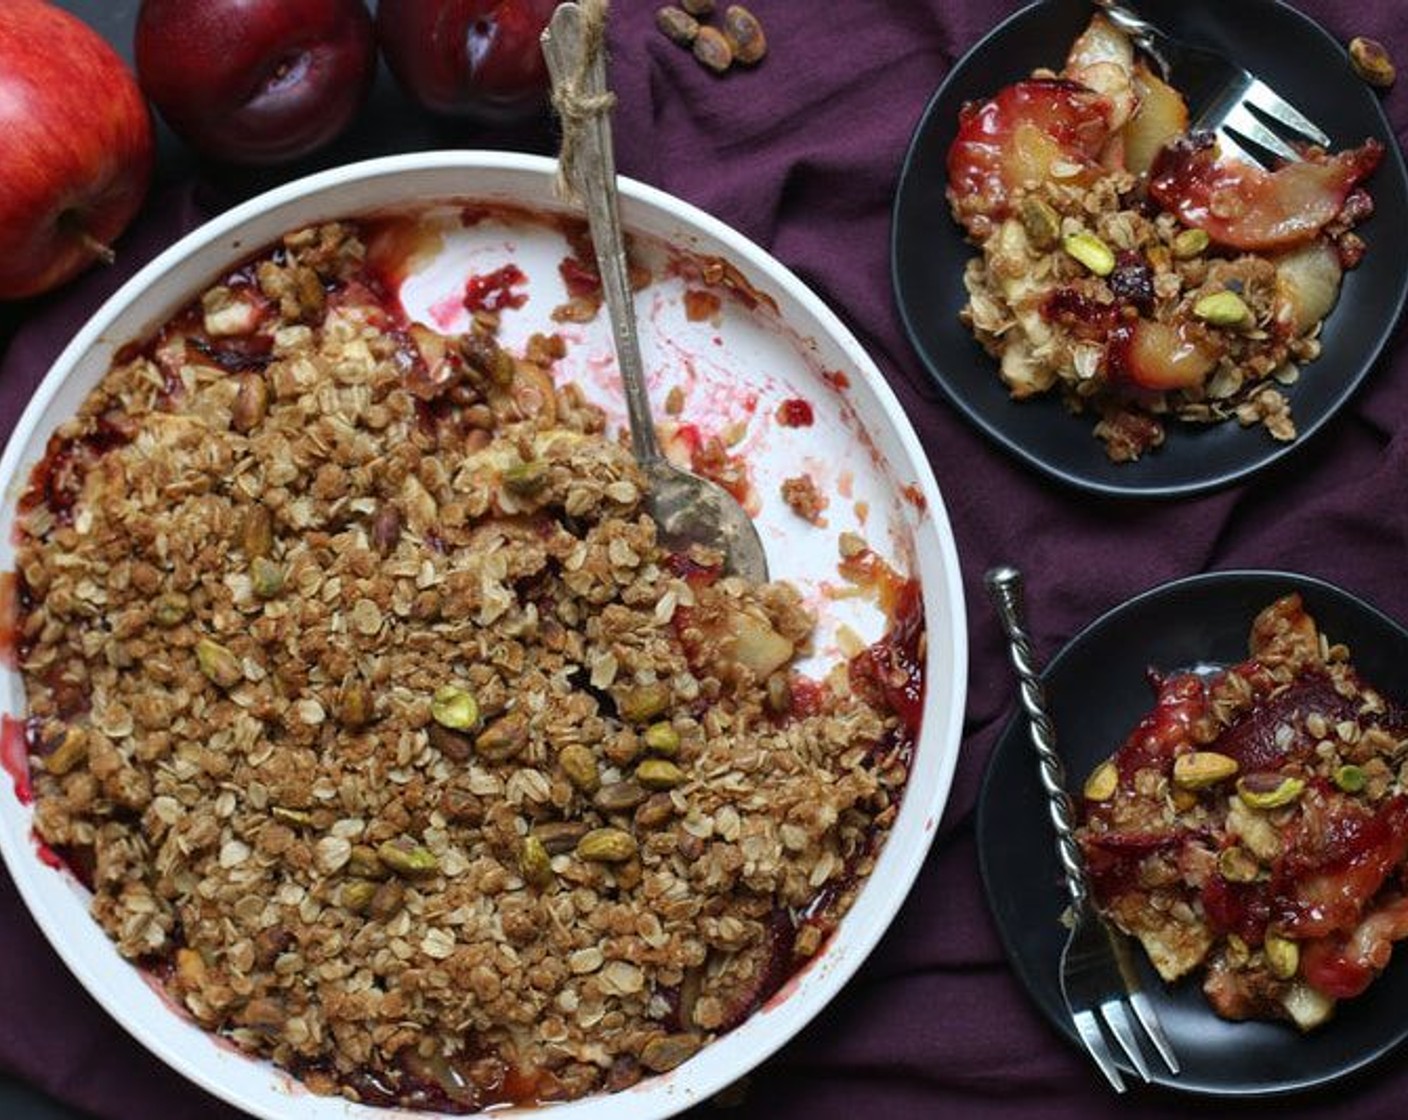 Plum and Apple Cardamom Crumble with Pistachios